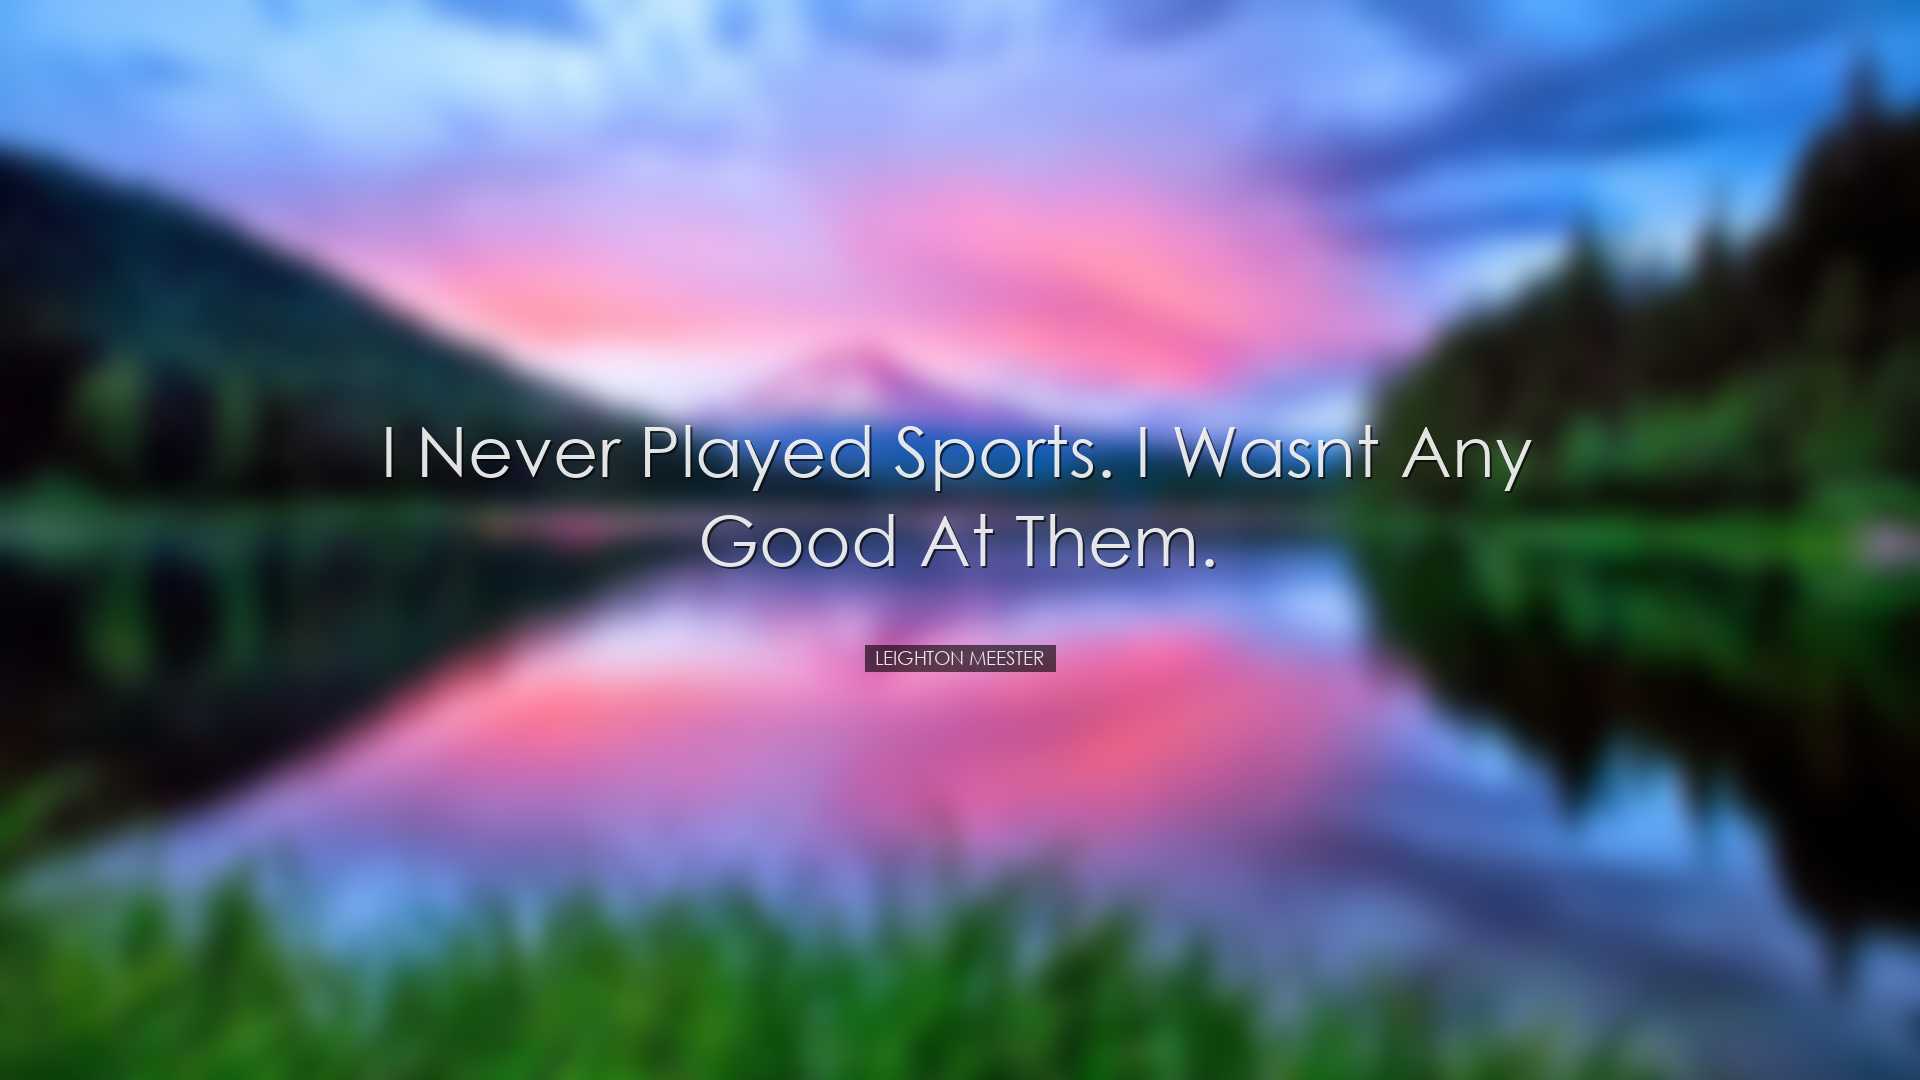 I never played sports. I wasnt any good at them. - Leighton Meeste